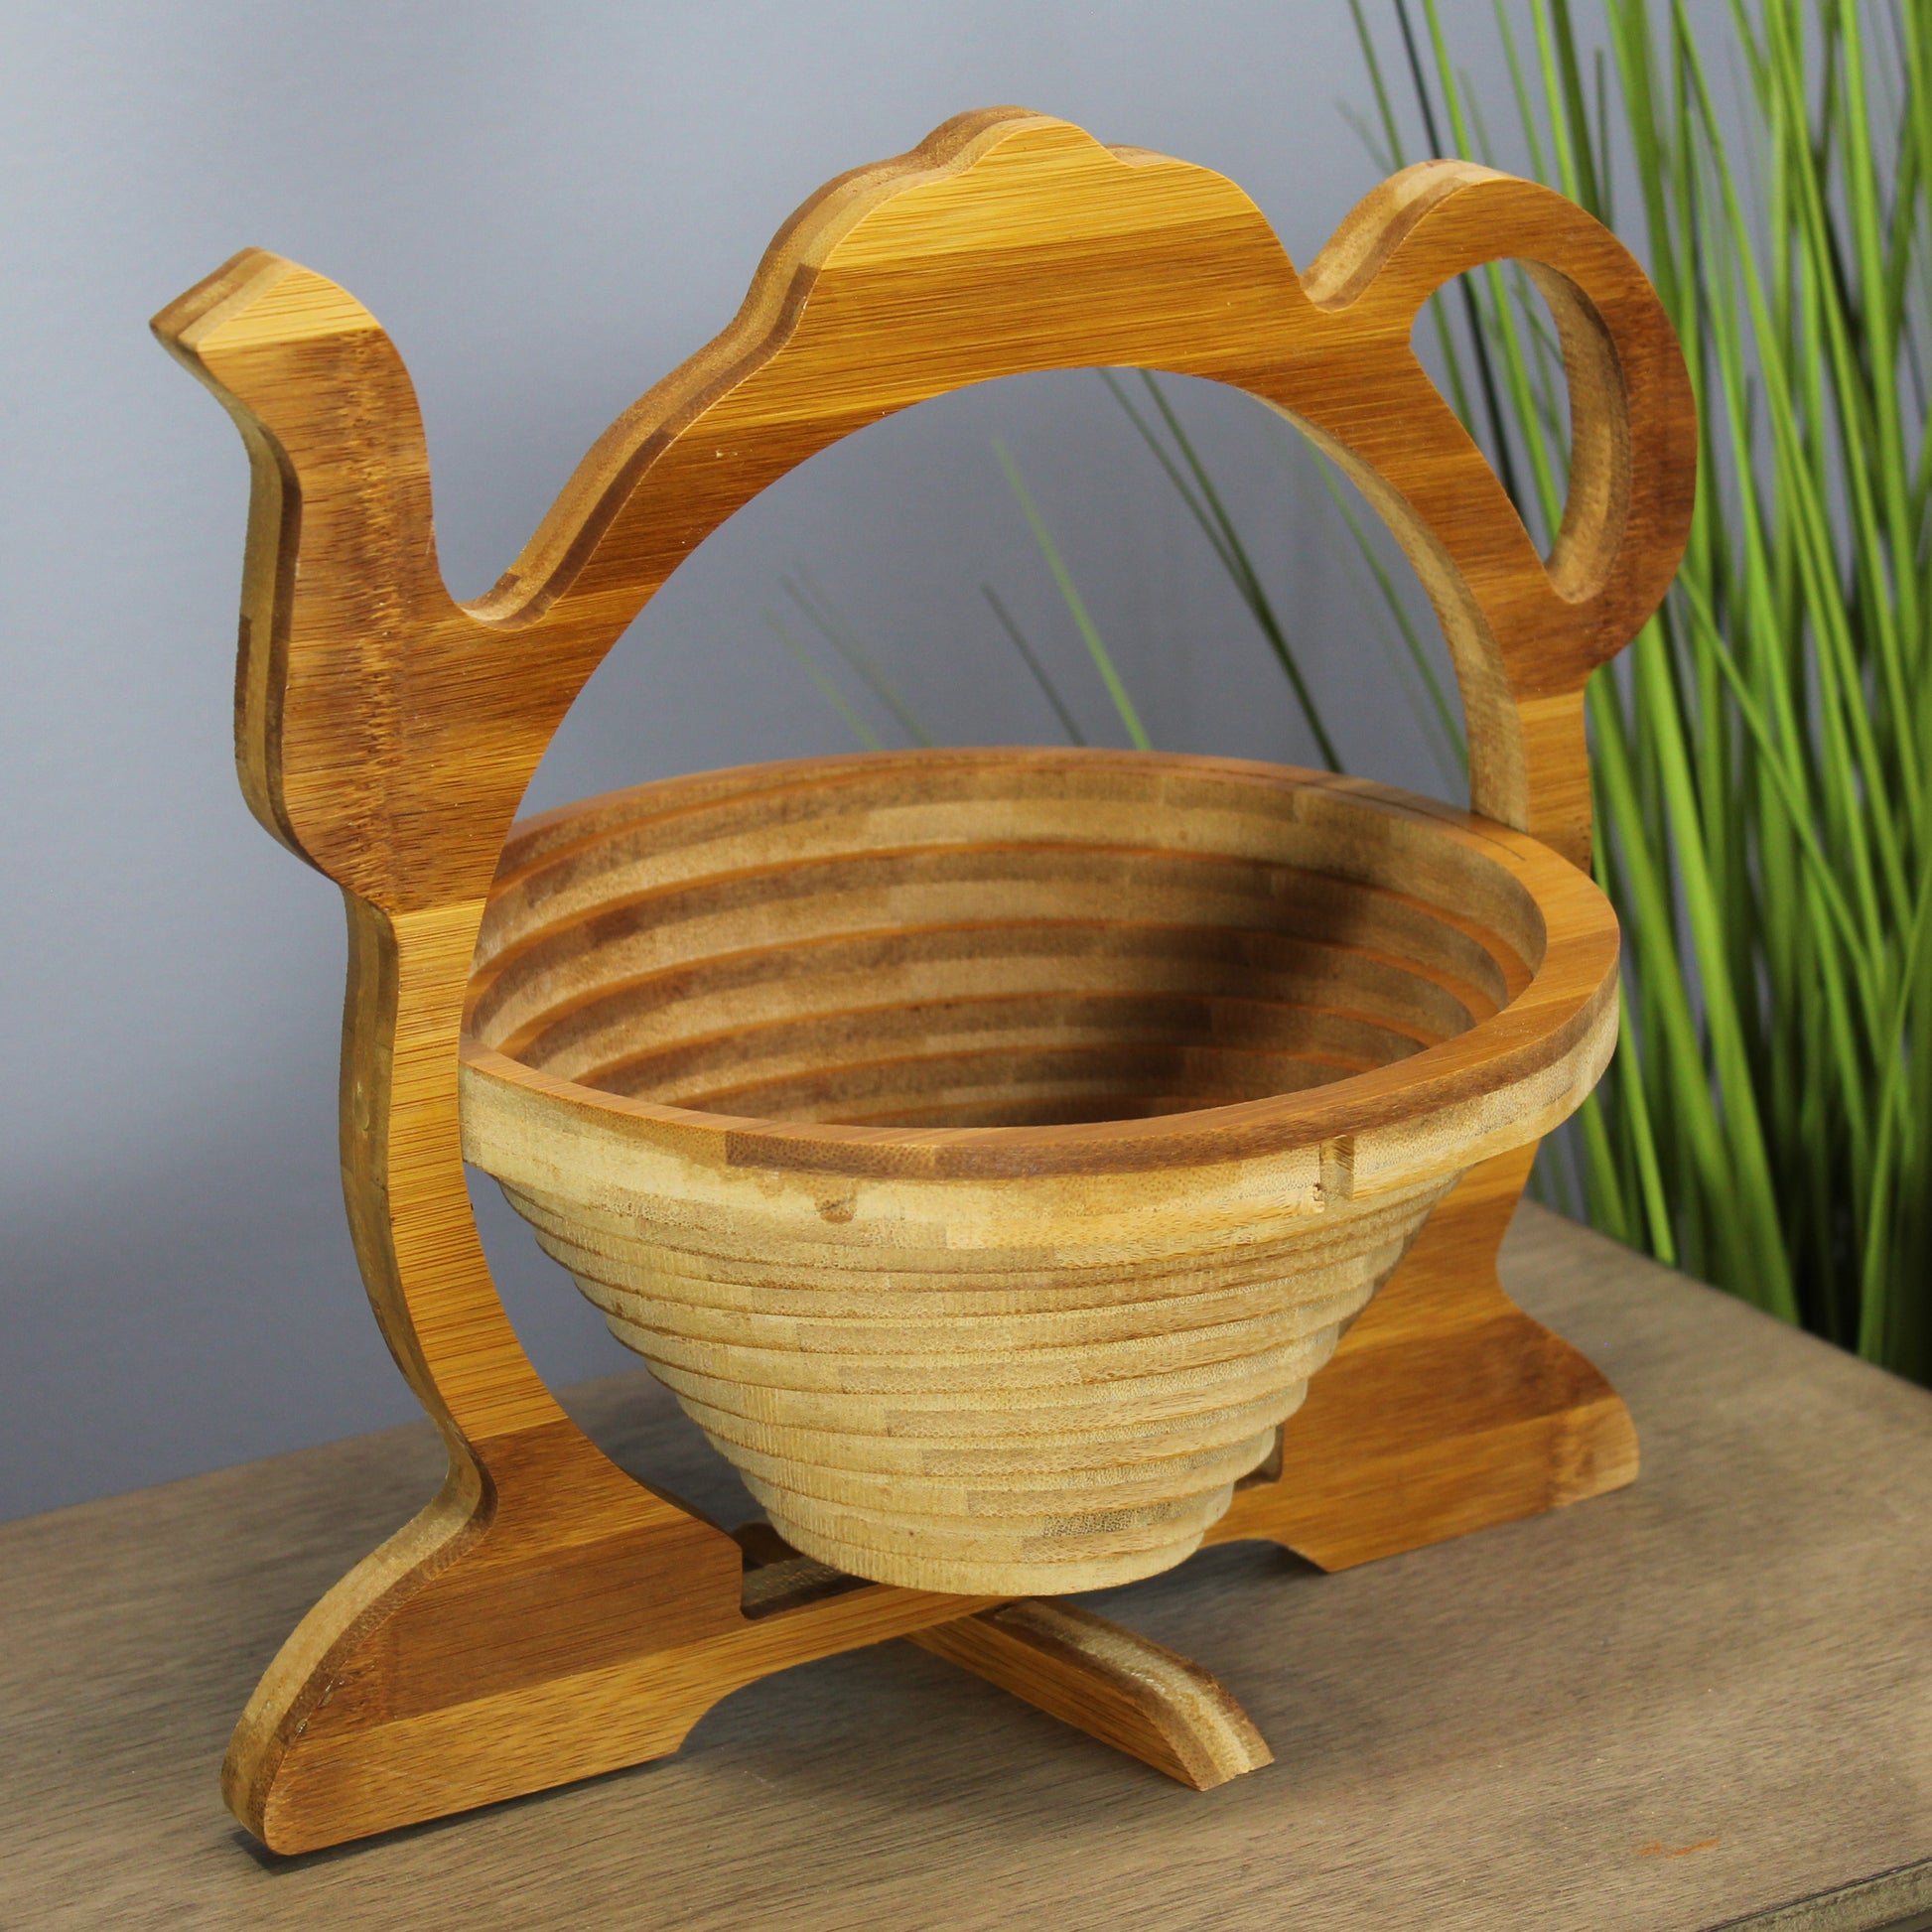 Natural Geo Handcarved Wooden Teapot Collapsible Fruit Tray